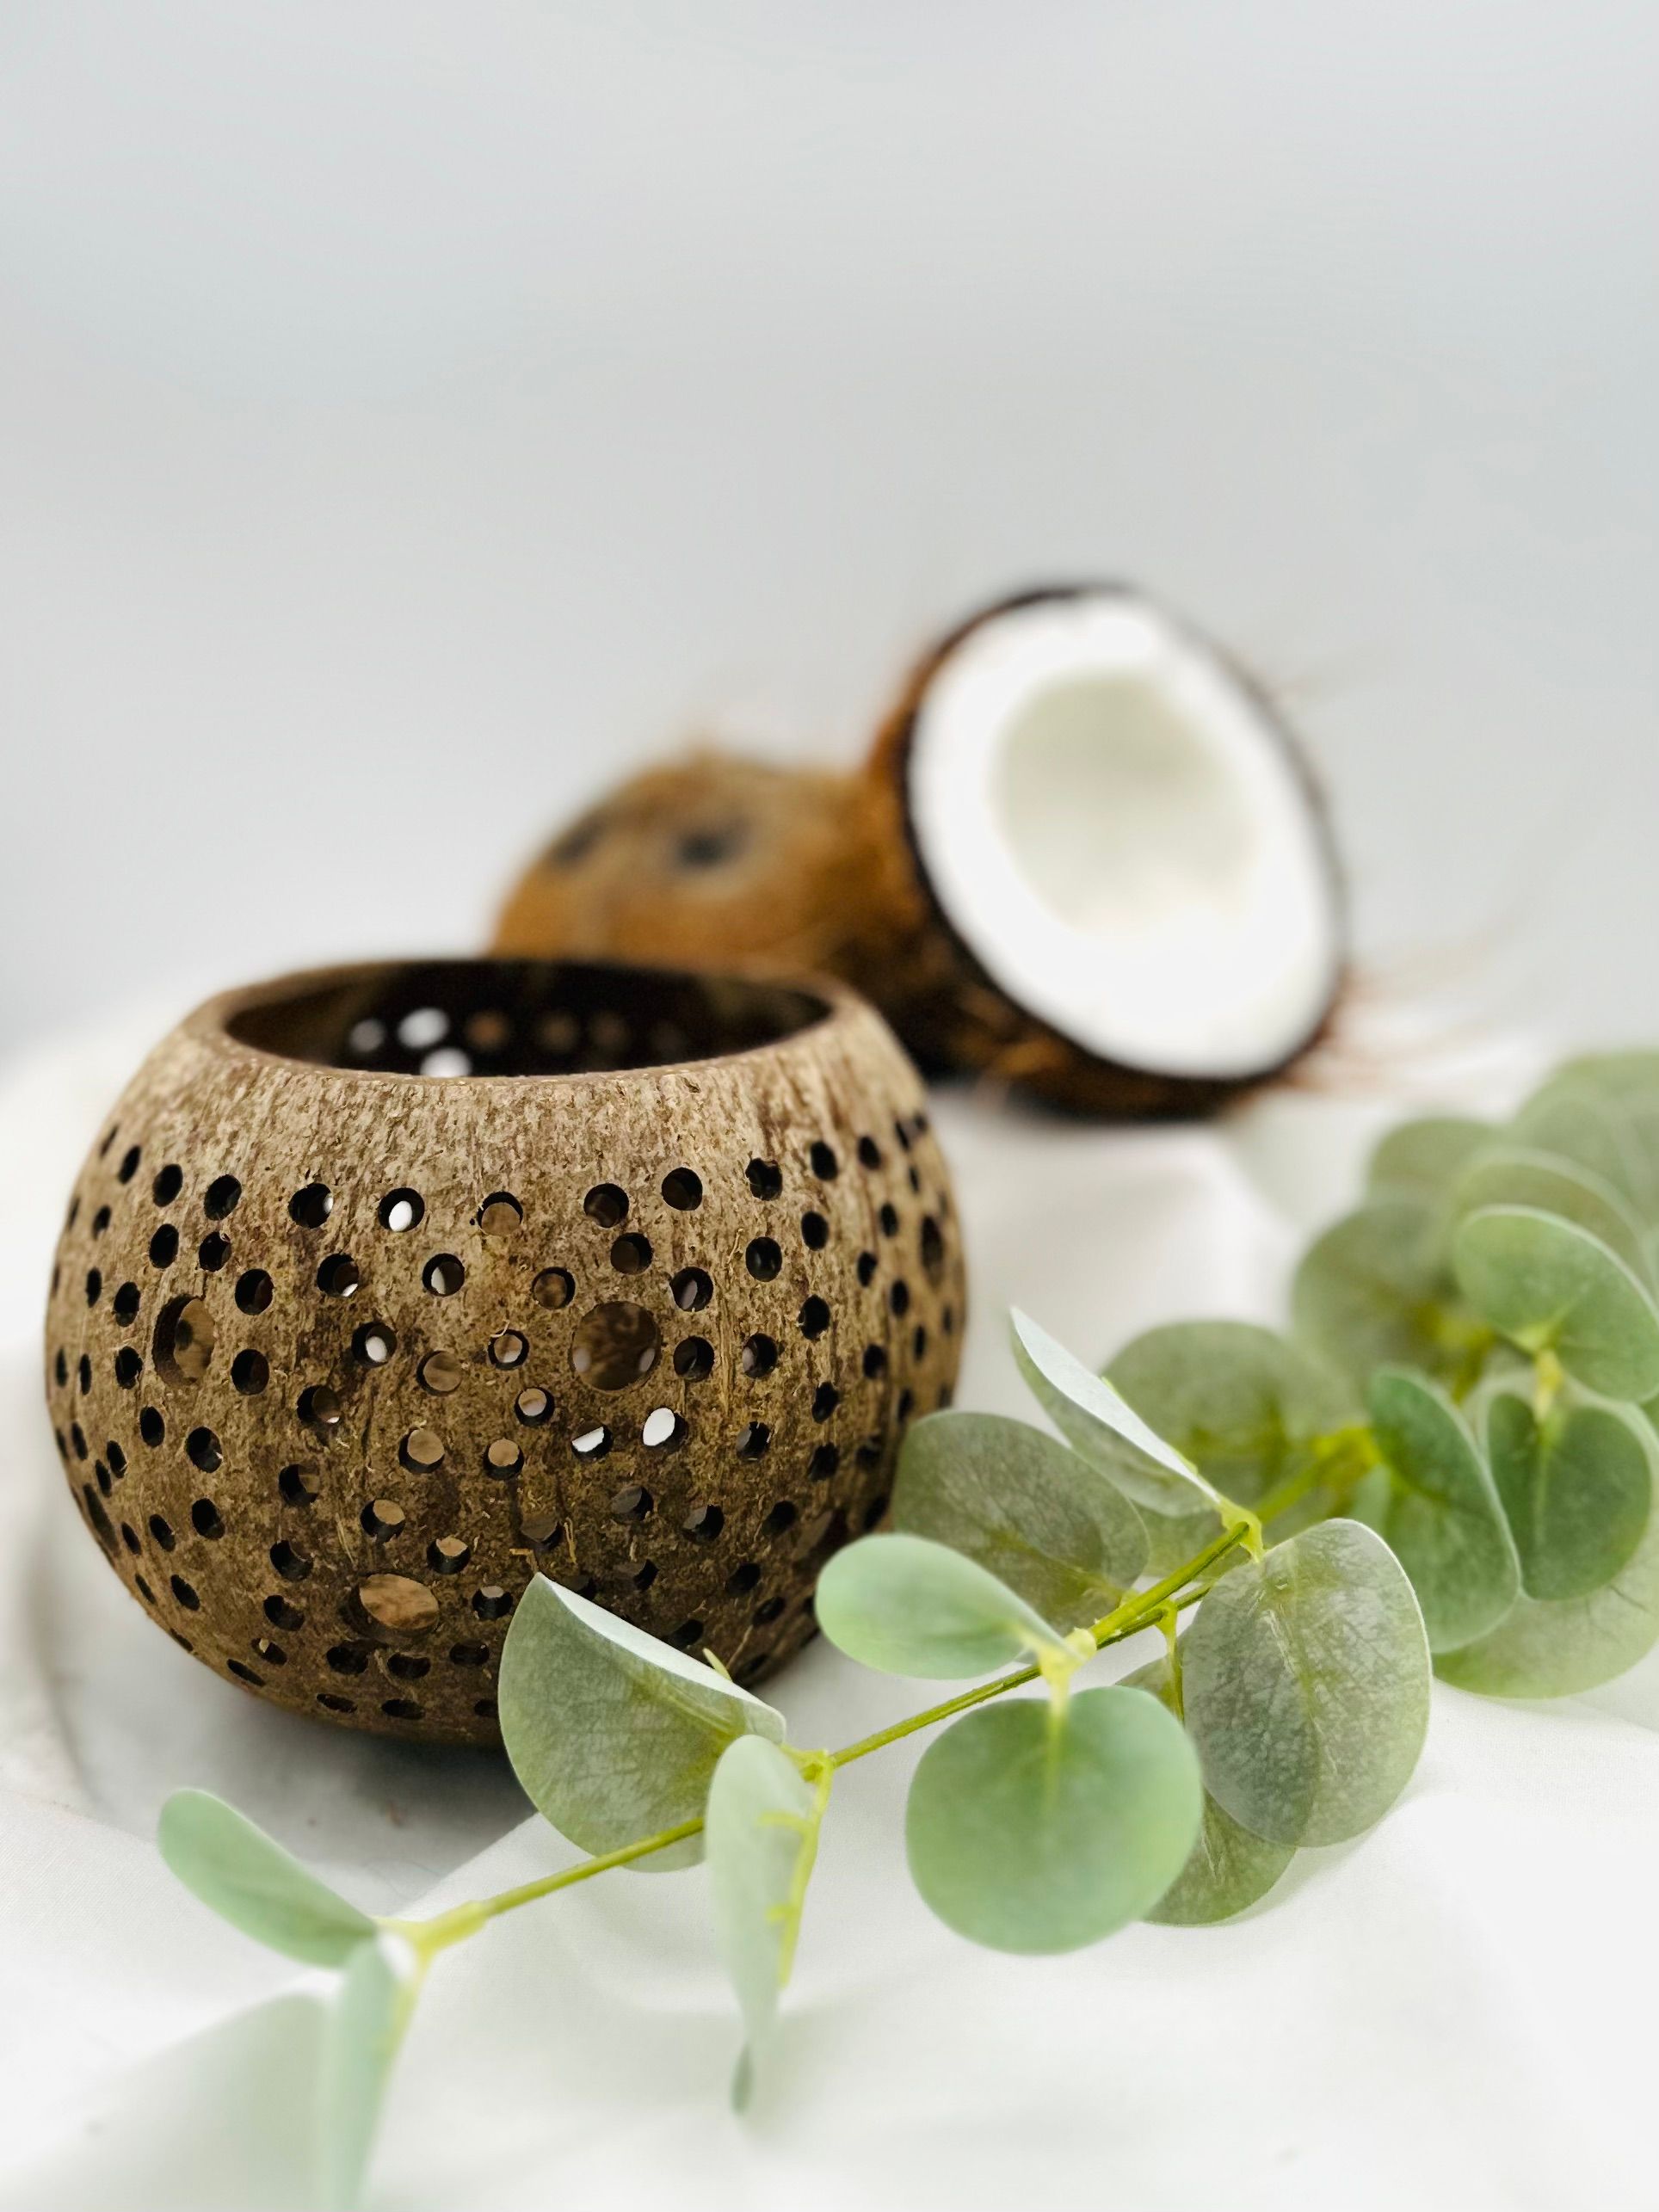 Coconut Shell Tea Light Holders and Sustainable Soy Wax Coconut Candle